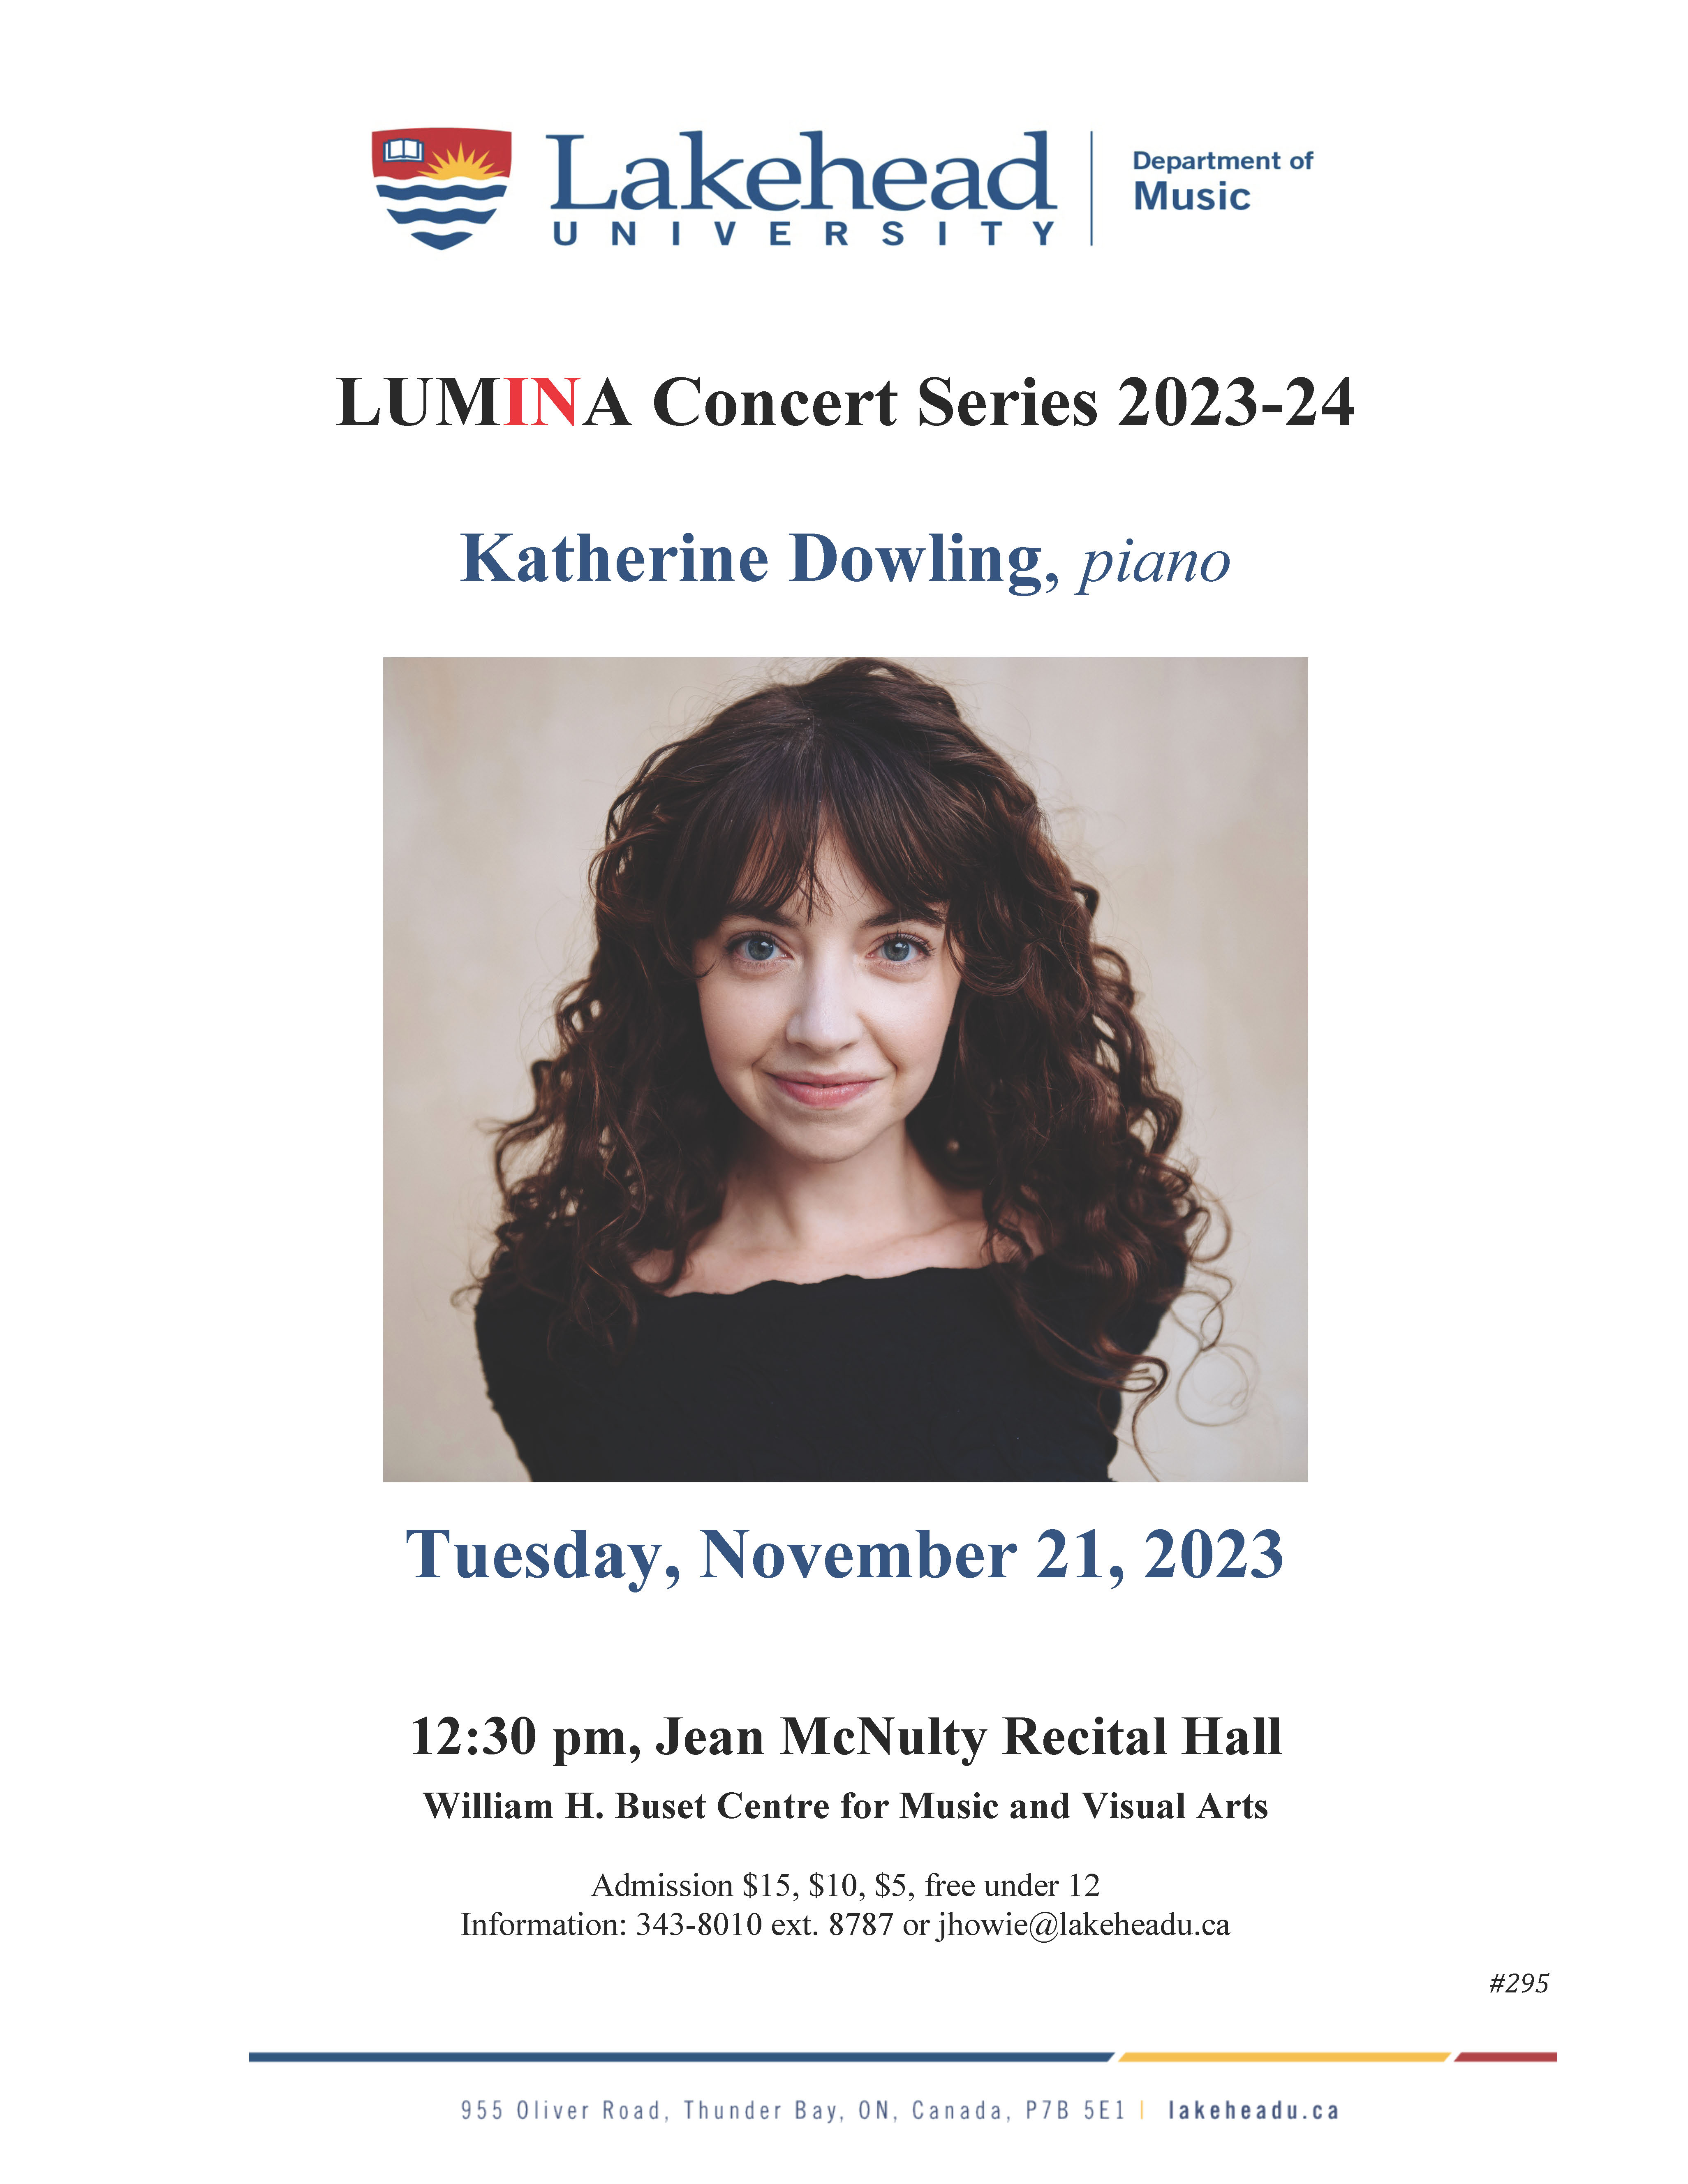 Katherine Dowling, piano concert